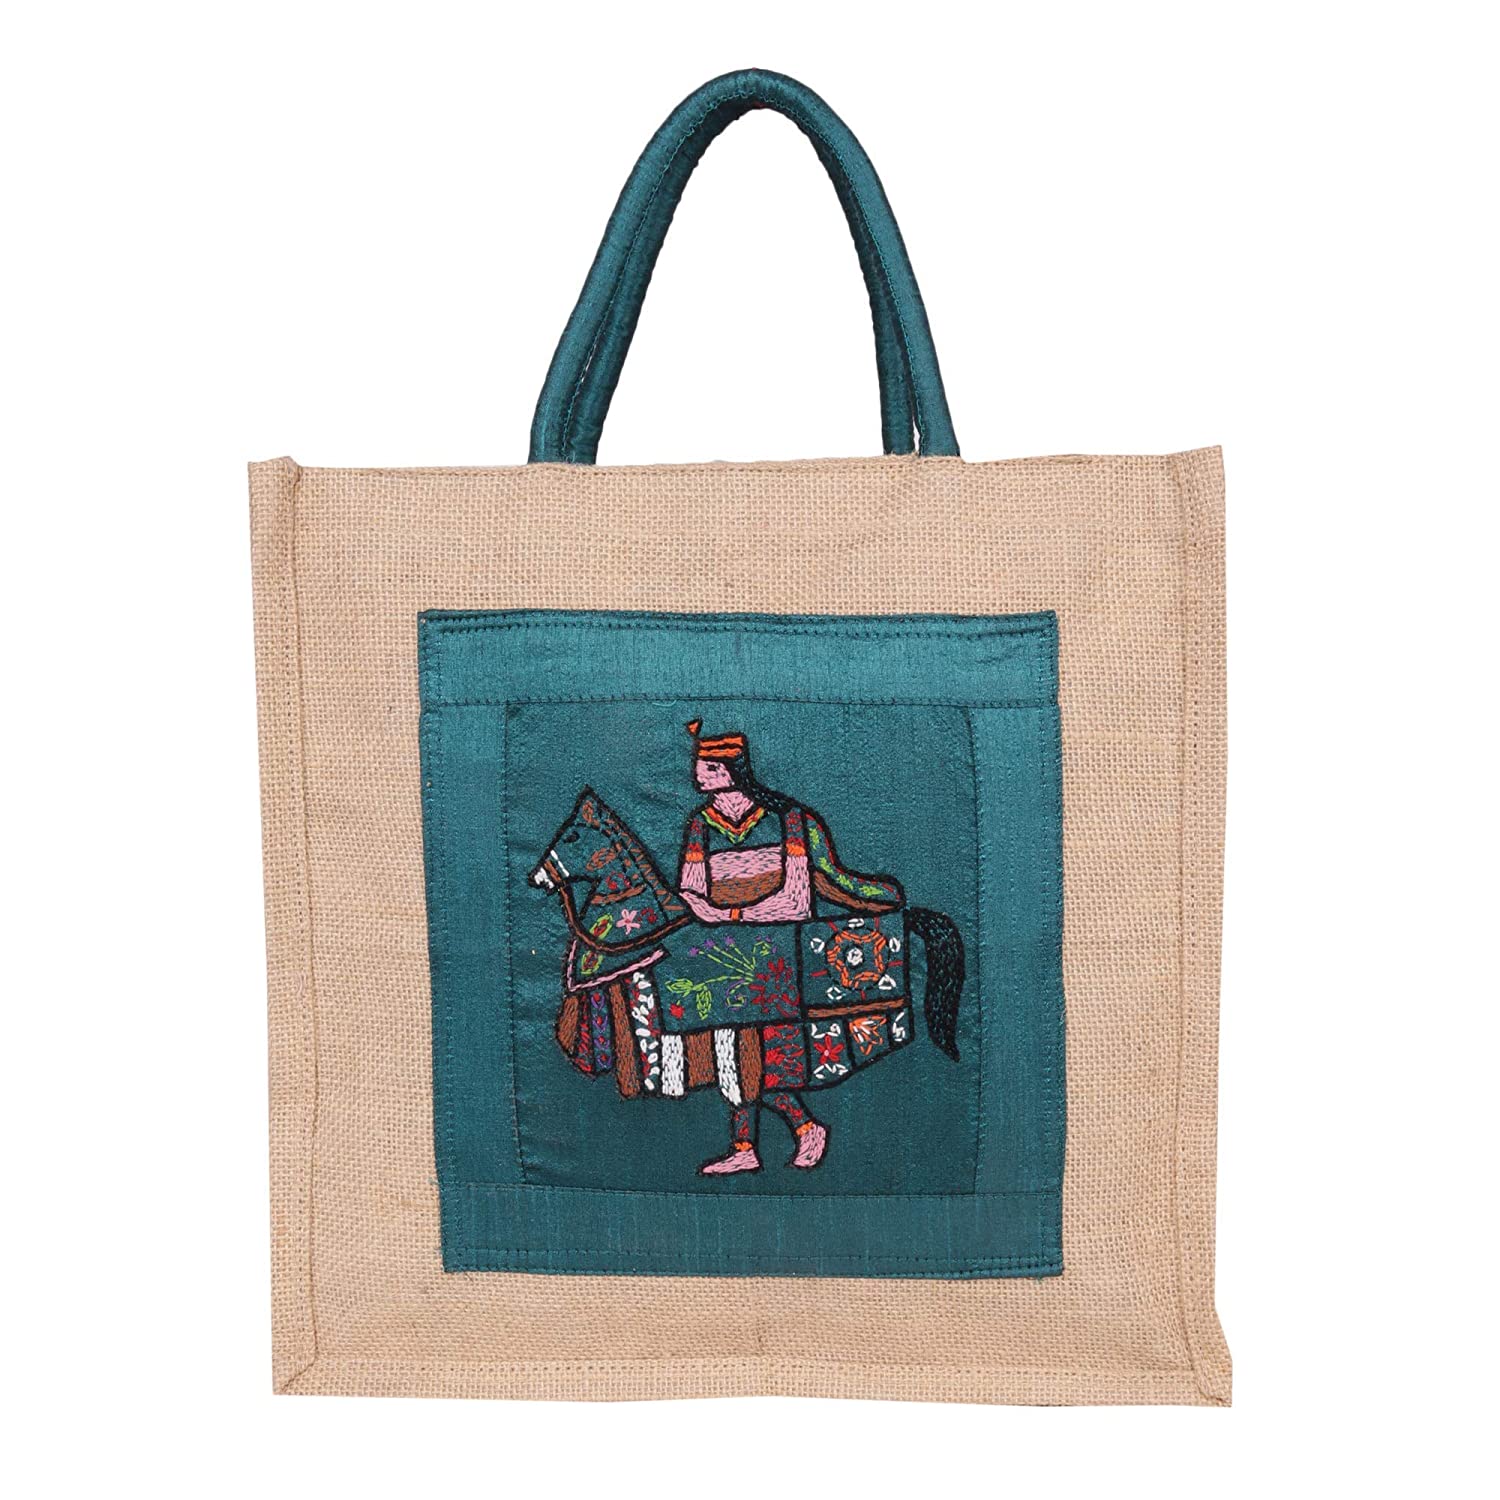 INDHA Kachhi Ghori Hand Embroidered Jute Lunch Bag for Men  Women Jute  Gift Bag Eco Friendly Bag Curated online shop for handcrafted products  made in India by women artisans